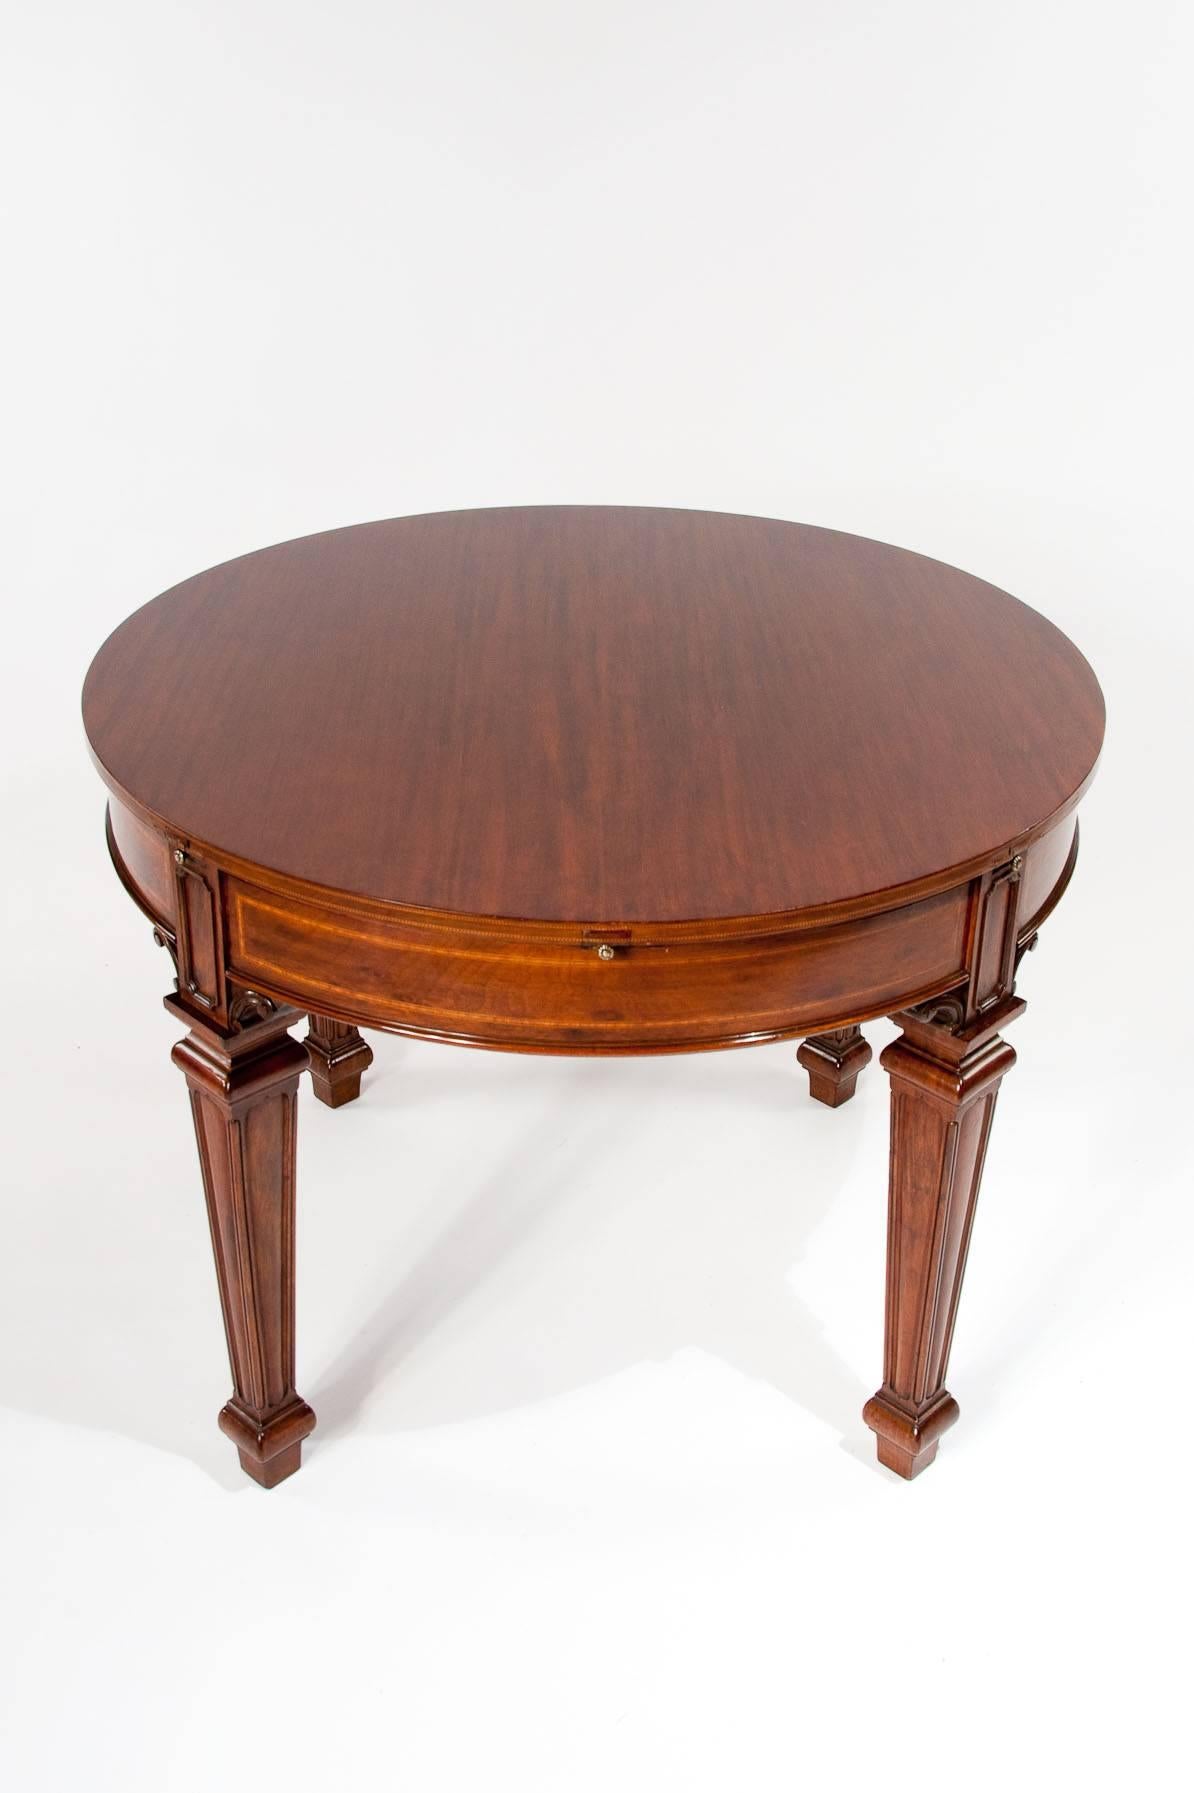 A fine quality and extremely rare extending Jupe style round table by Waring & Gillows. This fabulous quality table made in the Edwardian period circa 1900 is constructed of solid mahogany having a circular top with banded edge above four numbered